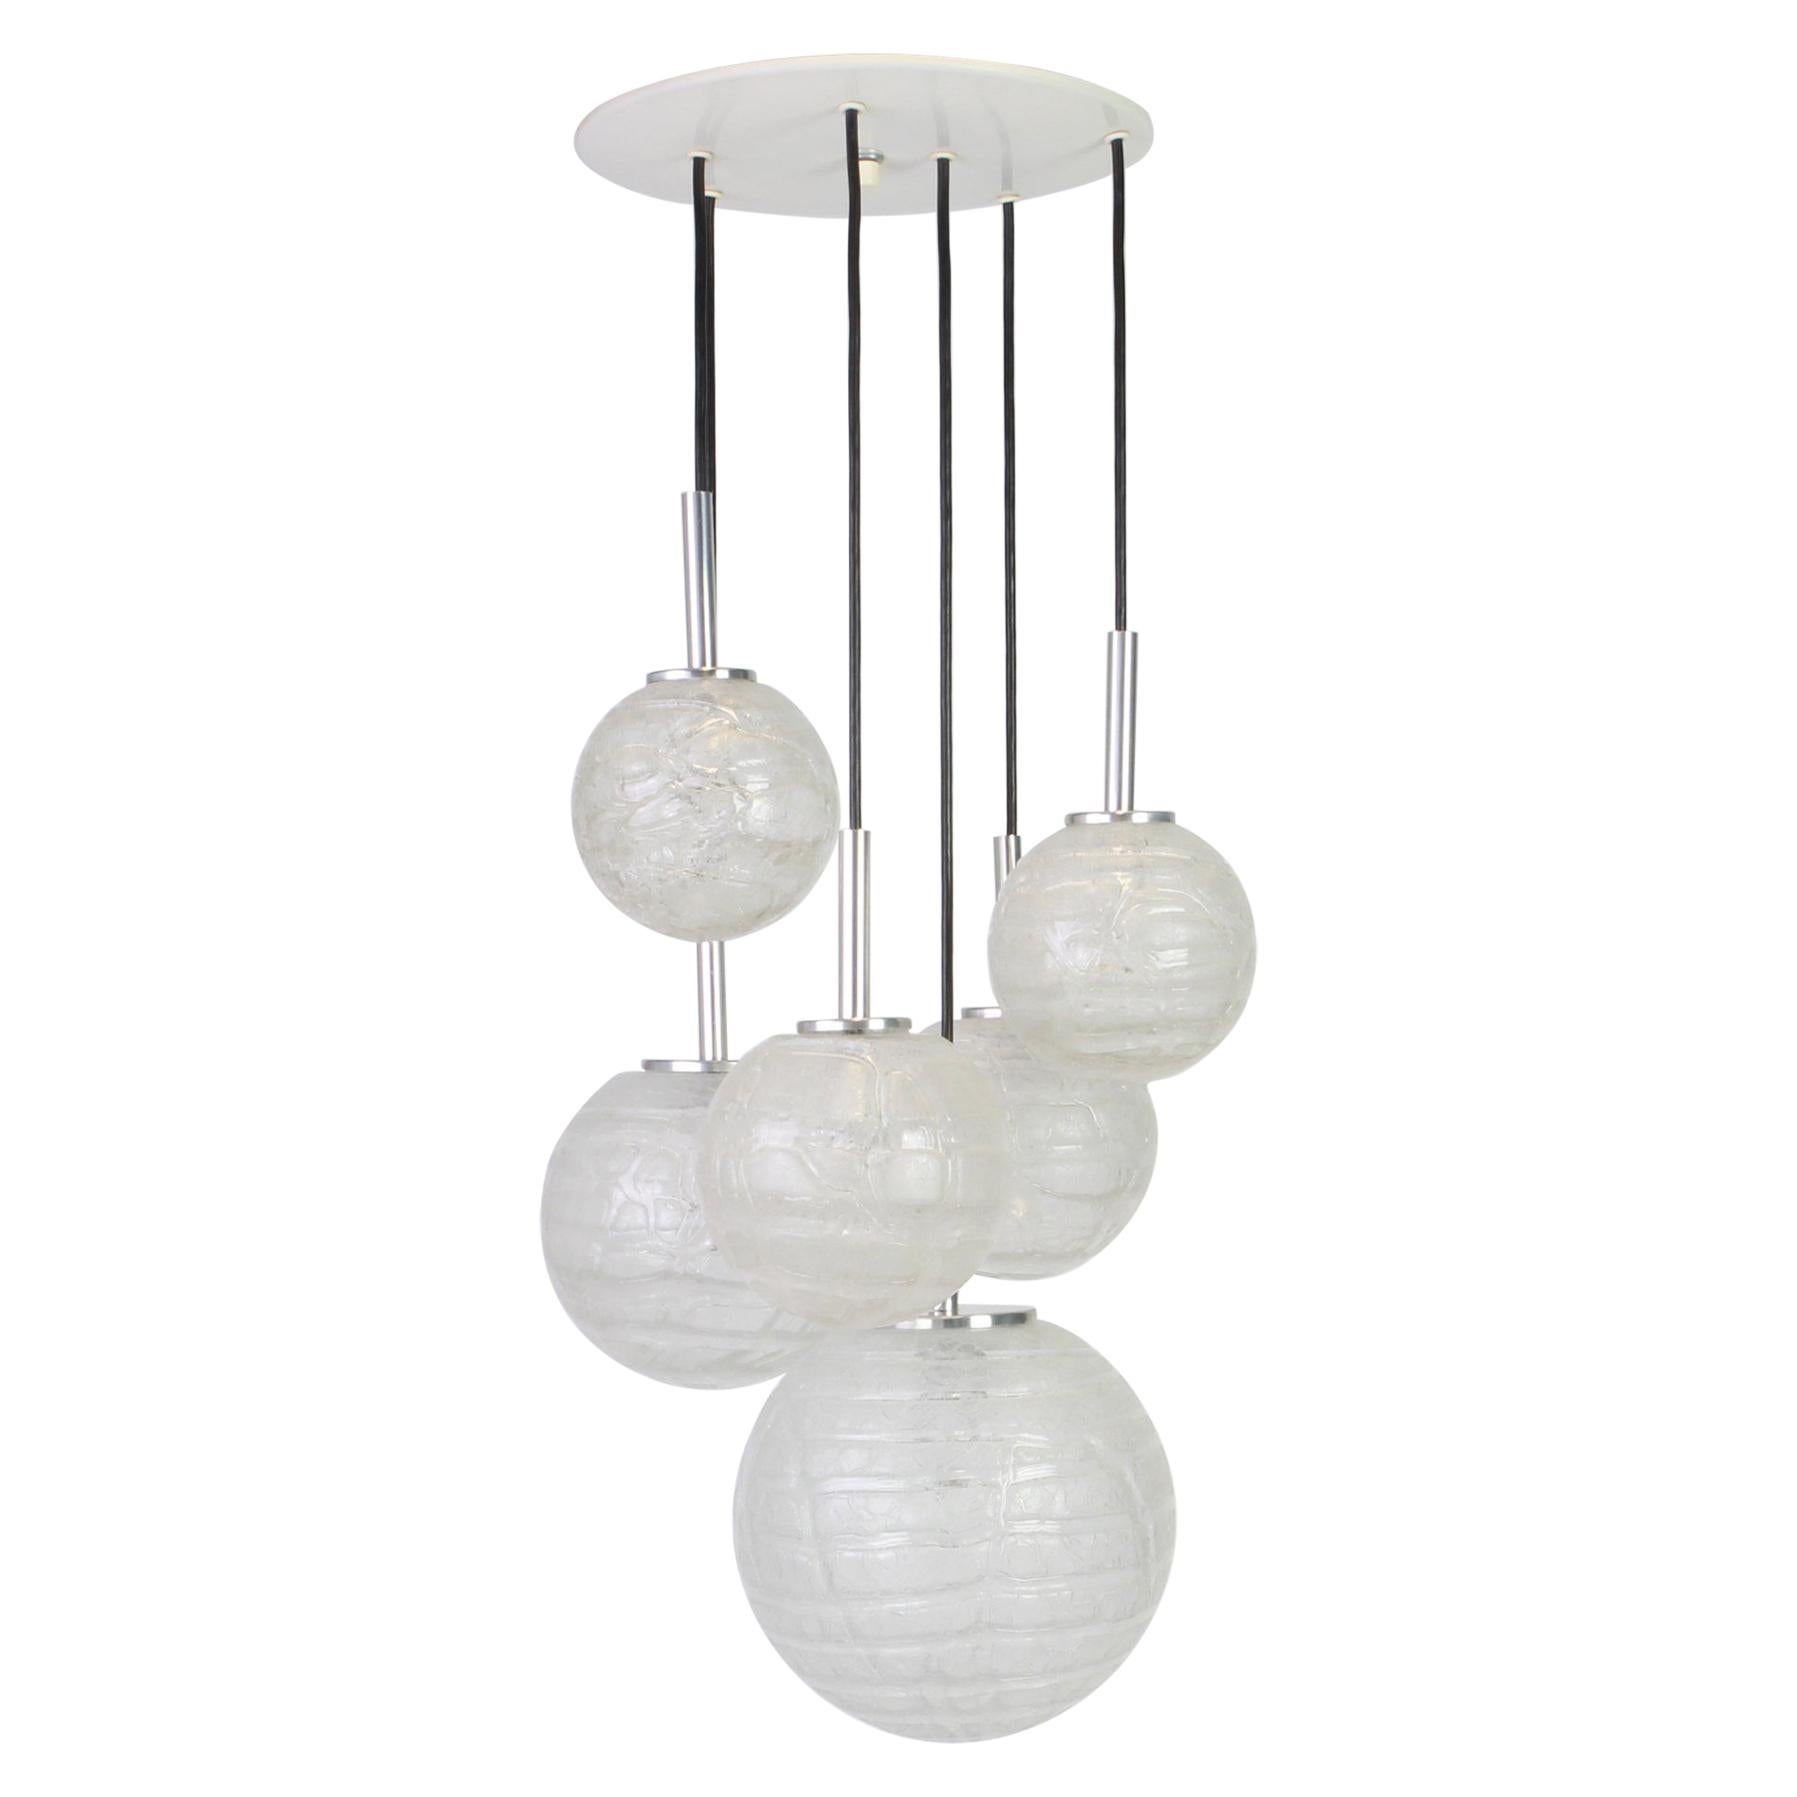 Large Designer Cascading Chandelier Murano Glass by Doria, Germany, 1970s